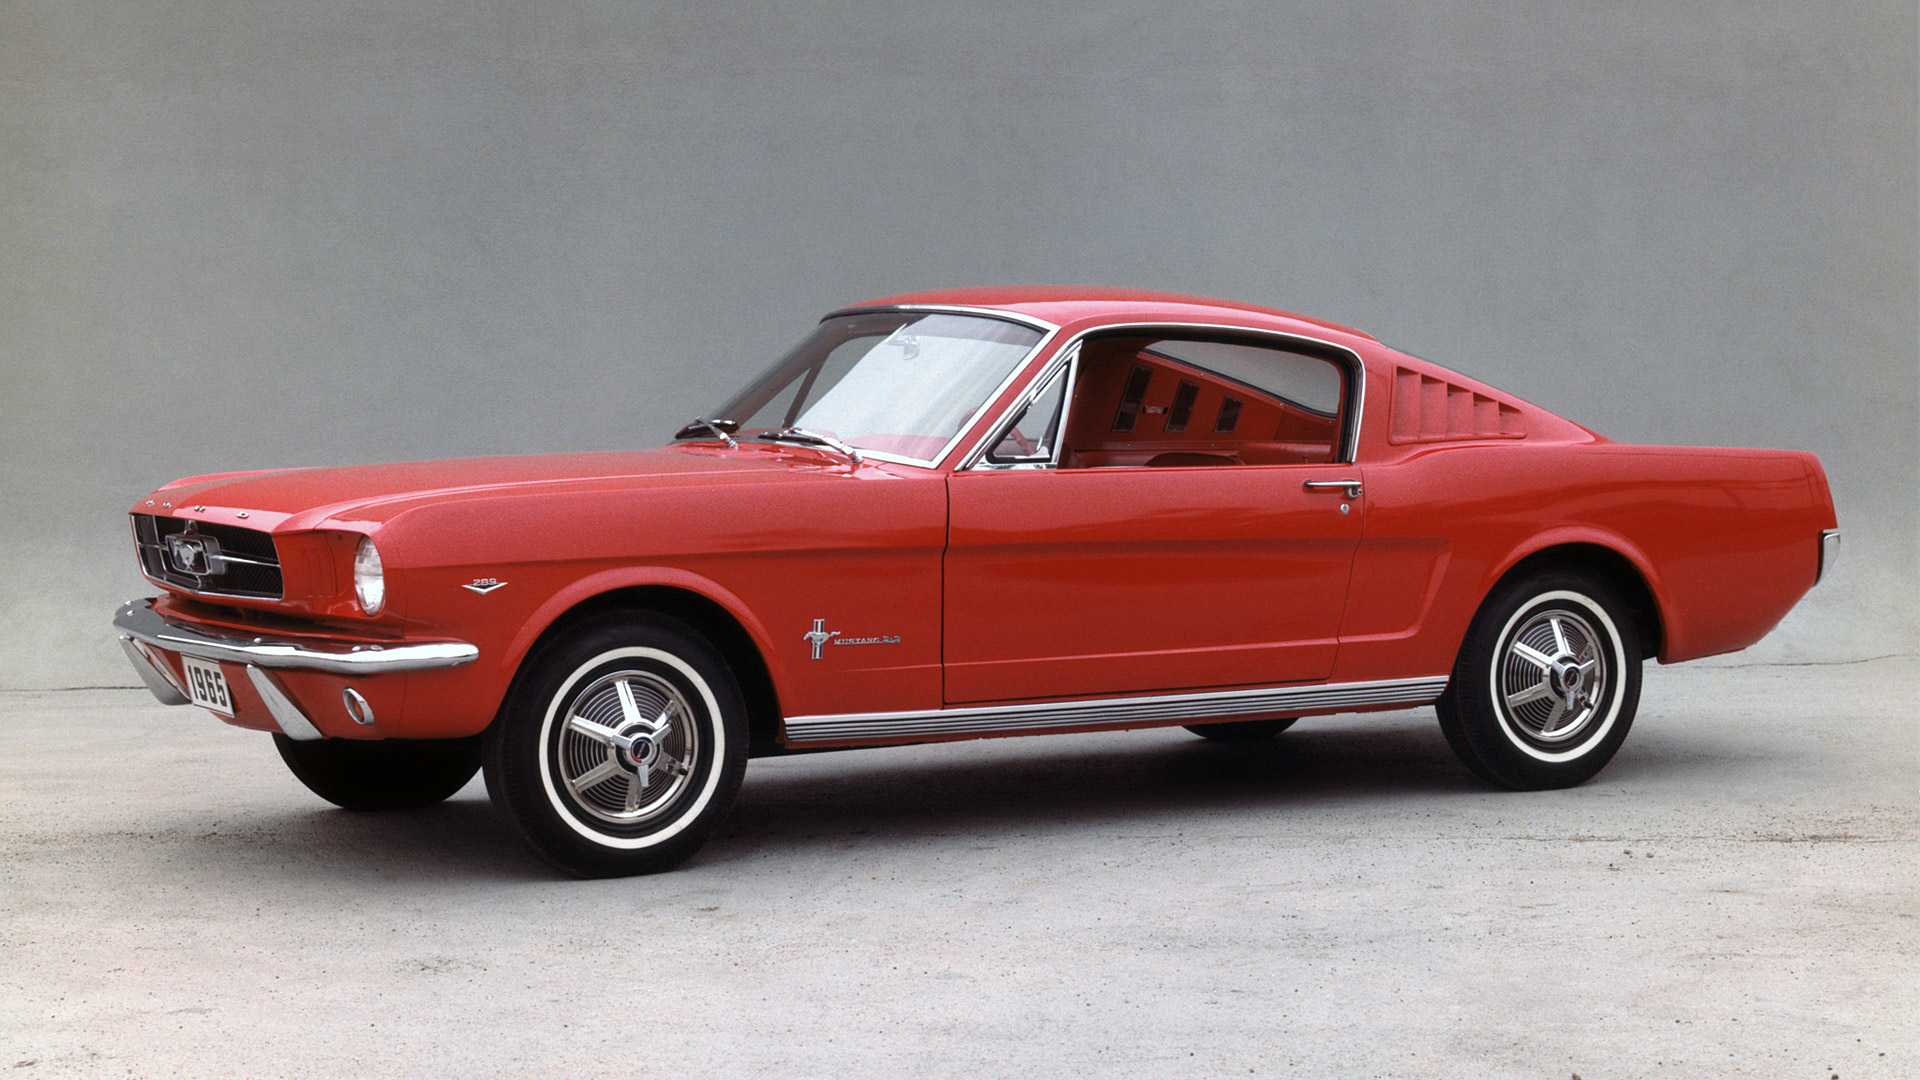 Ford Mustang Fastback Wallpaper HD Image Wsupercars